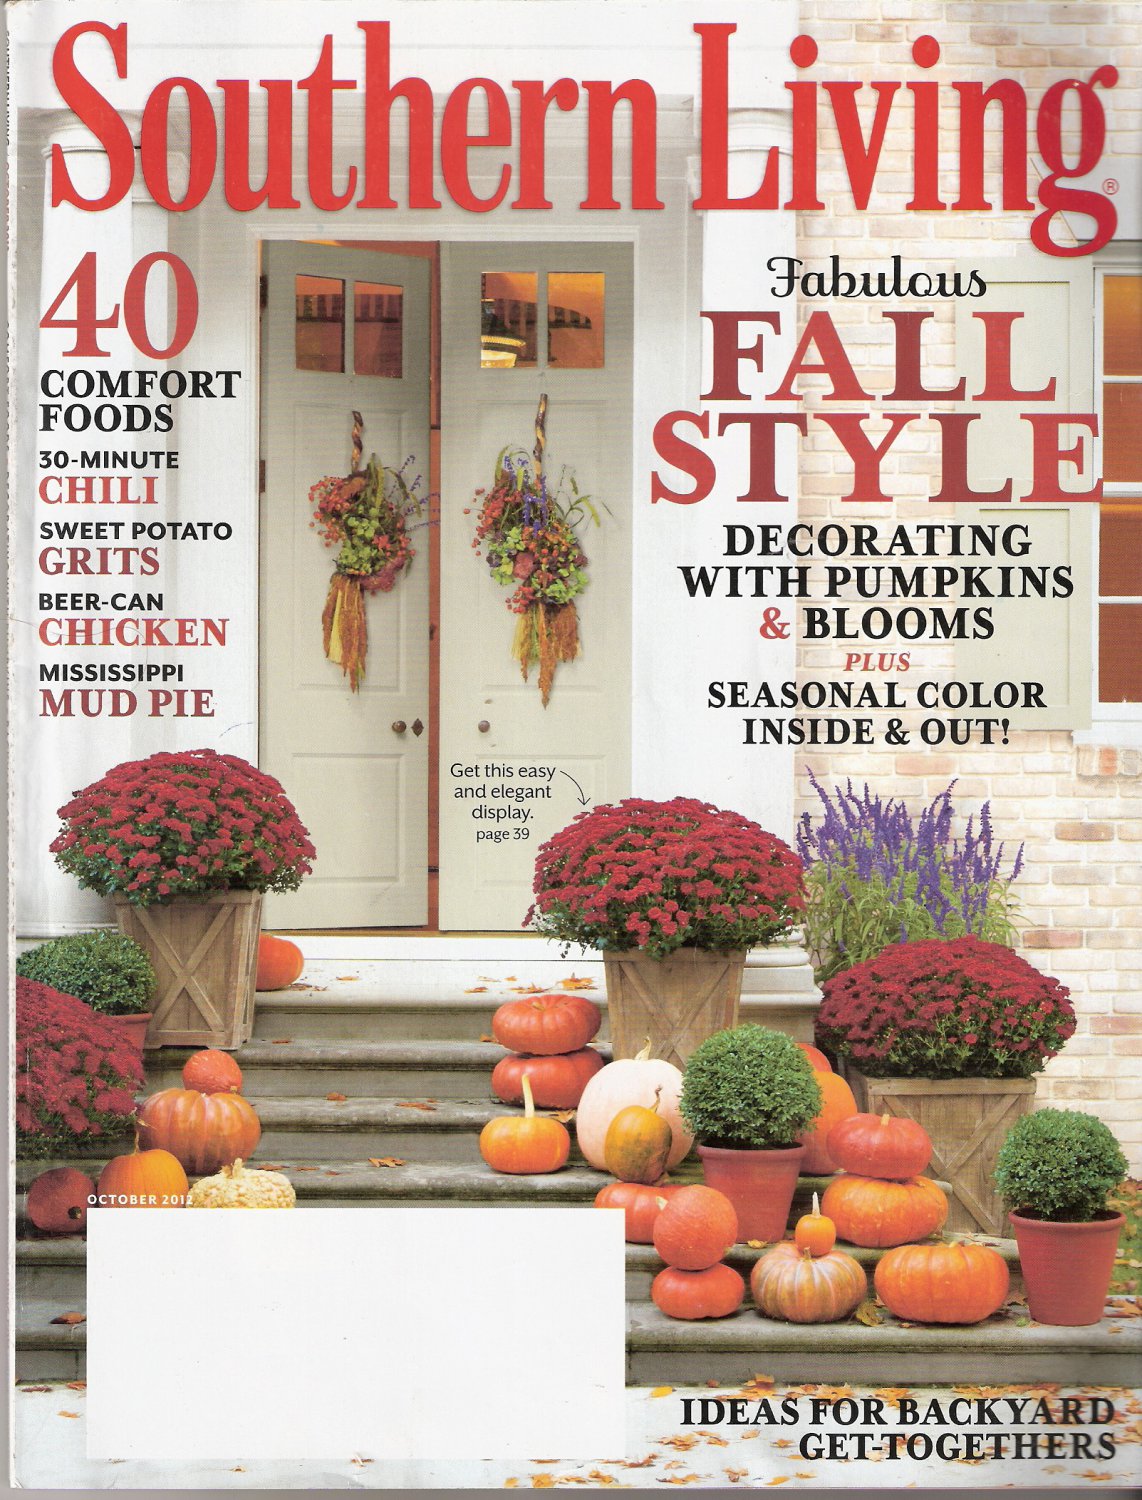 Southern Living Magazine October 2012 Fabulous Fall Style